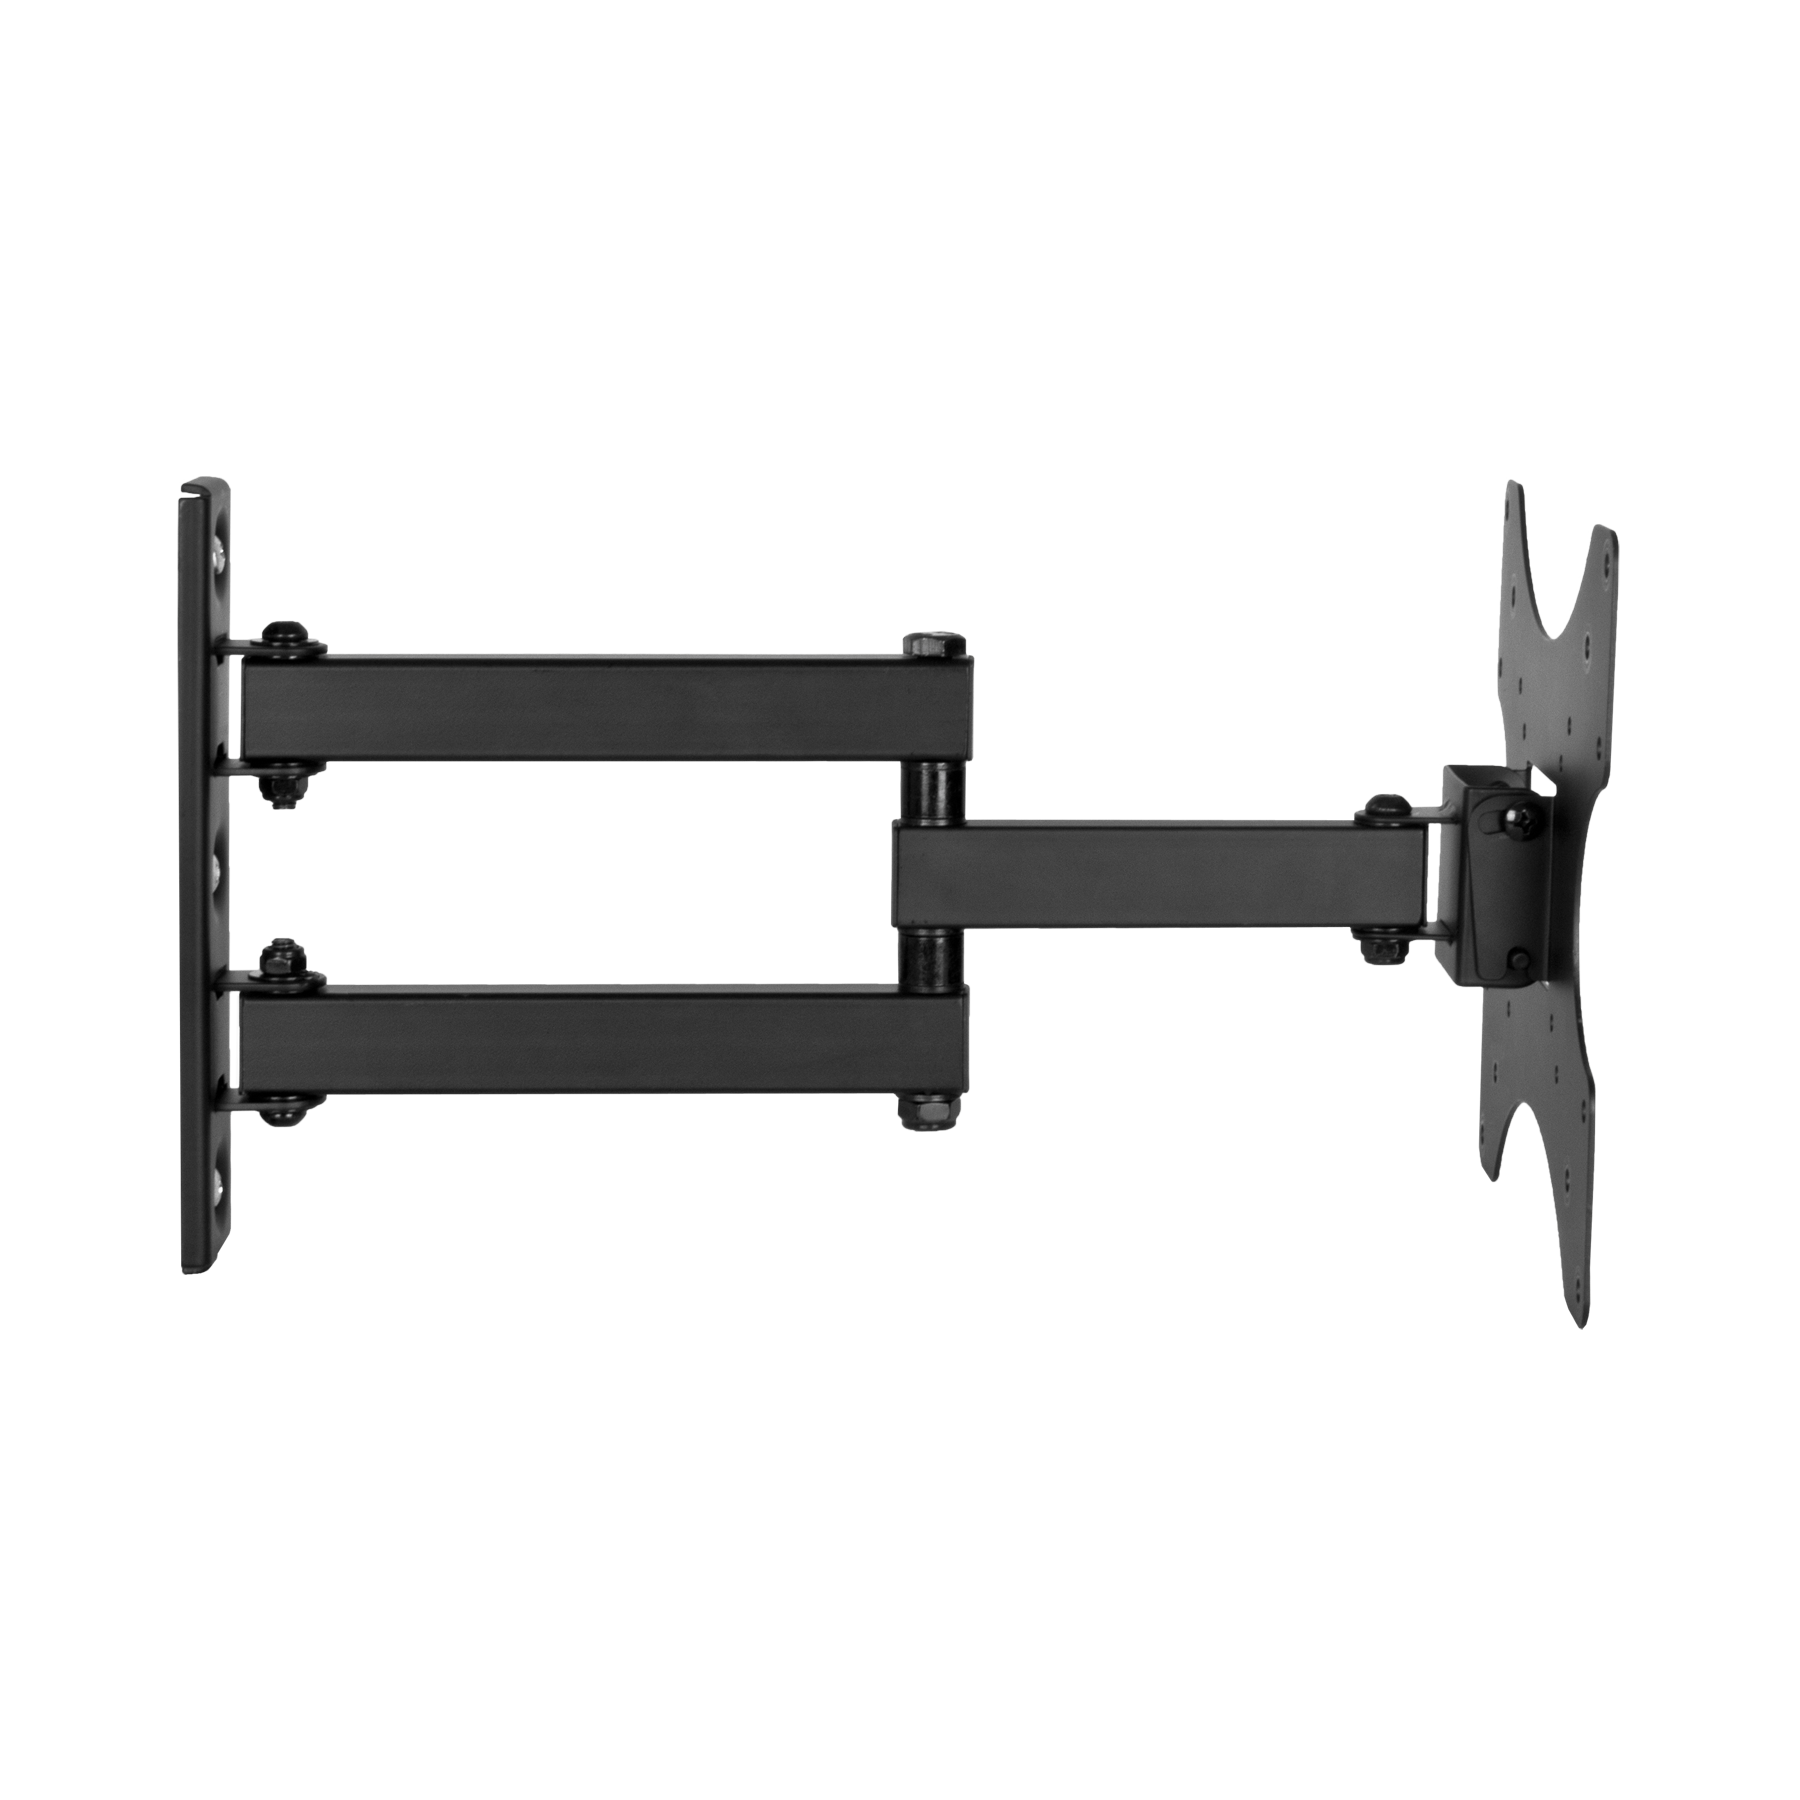 Expert Connect | TV Wall Mount Bracket | 17 - 42" | Full Motion Articulating | Tilt & Swivel & Rotation Adjustment | Max VESA 200x200mm | For LED, LCD, OLED and Flat Screen TVs Up to 50 lbs - image 2 of 4